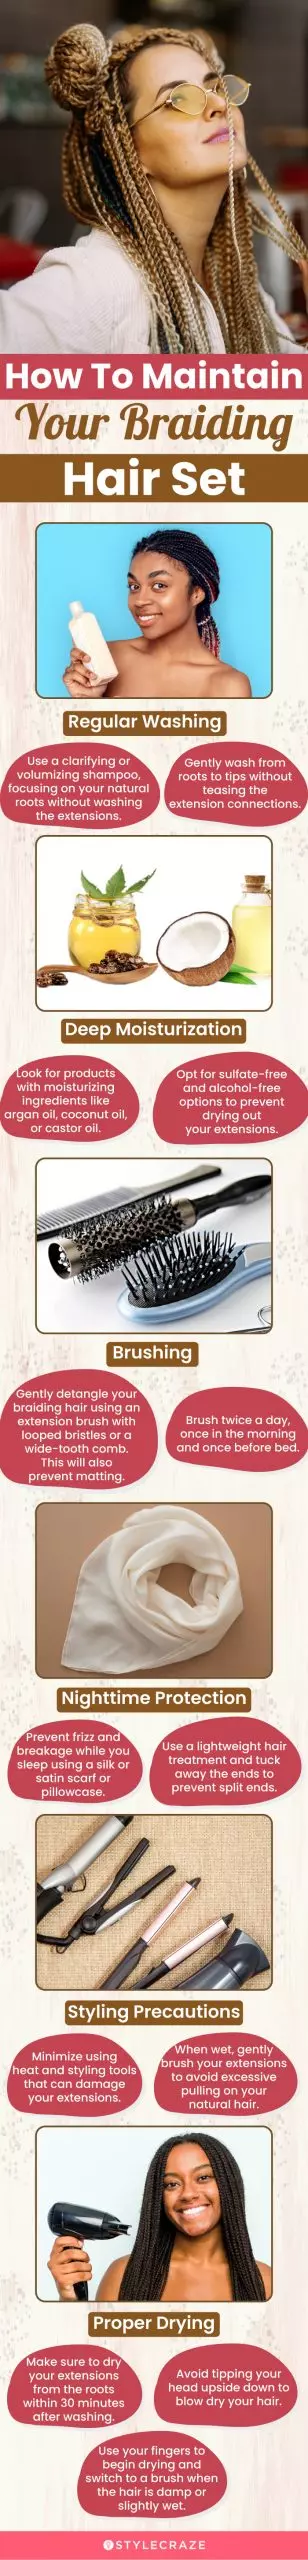 How To Maintain Your Braiding Hair Set (infographic)